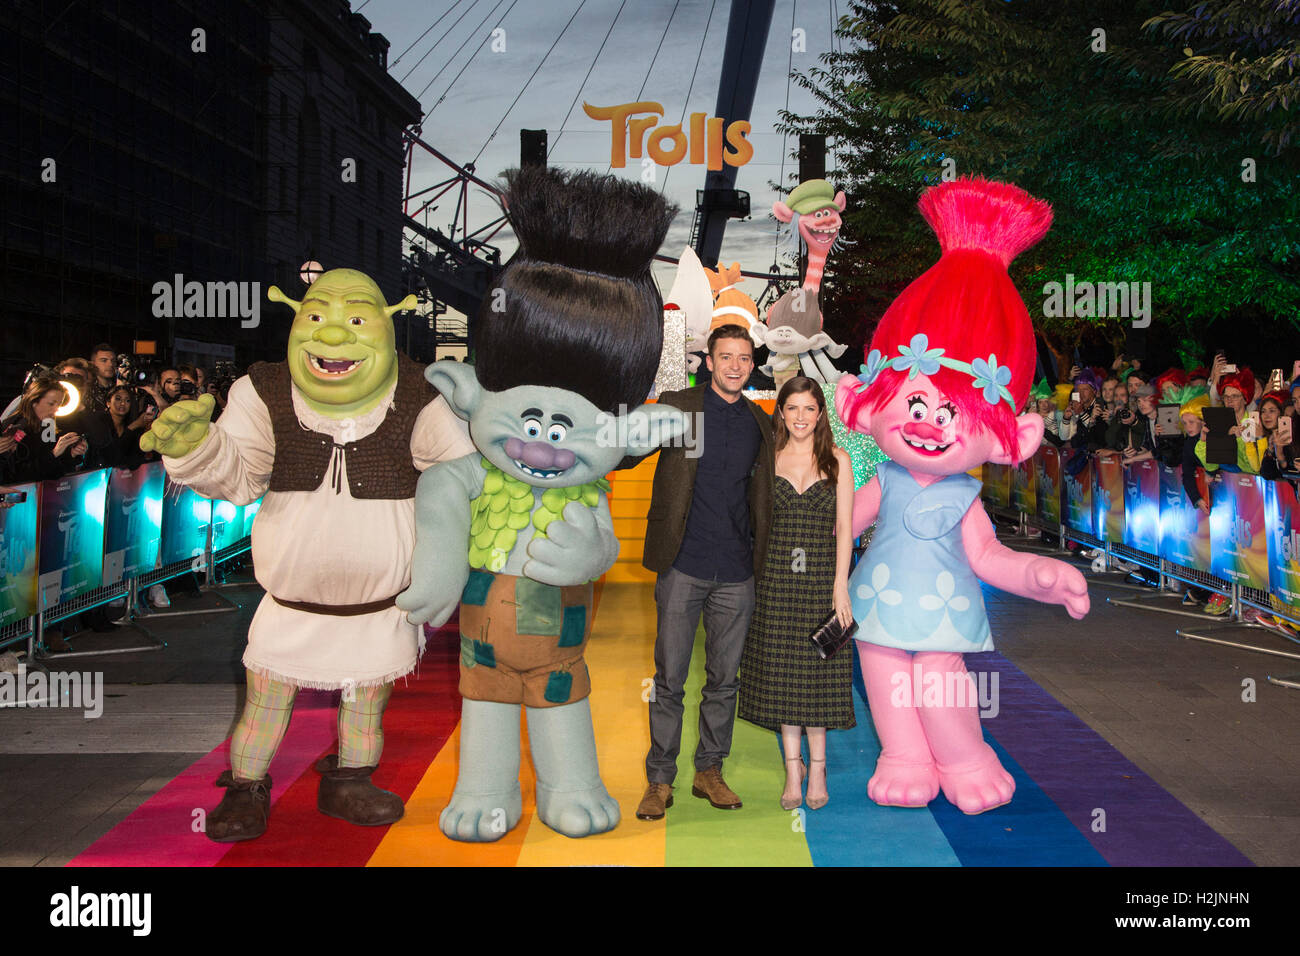 London, UK. 29 September 2016. Justin Timberlake and Anna Kendrick with characters from the movie Trolls and Shrek. Anna Kendrick and Justin Timberlake launch the movie TROLLS and light up The London Eye at Waterloo. Photocall for the new animated comedy TROLLS which is due to open on 21 October 2016. Stock Photo